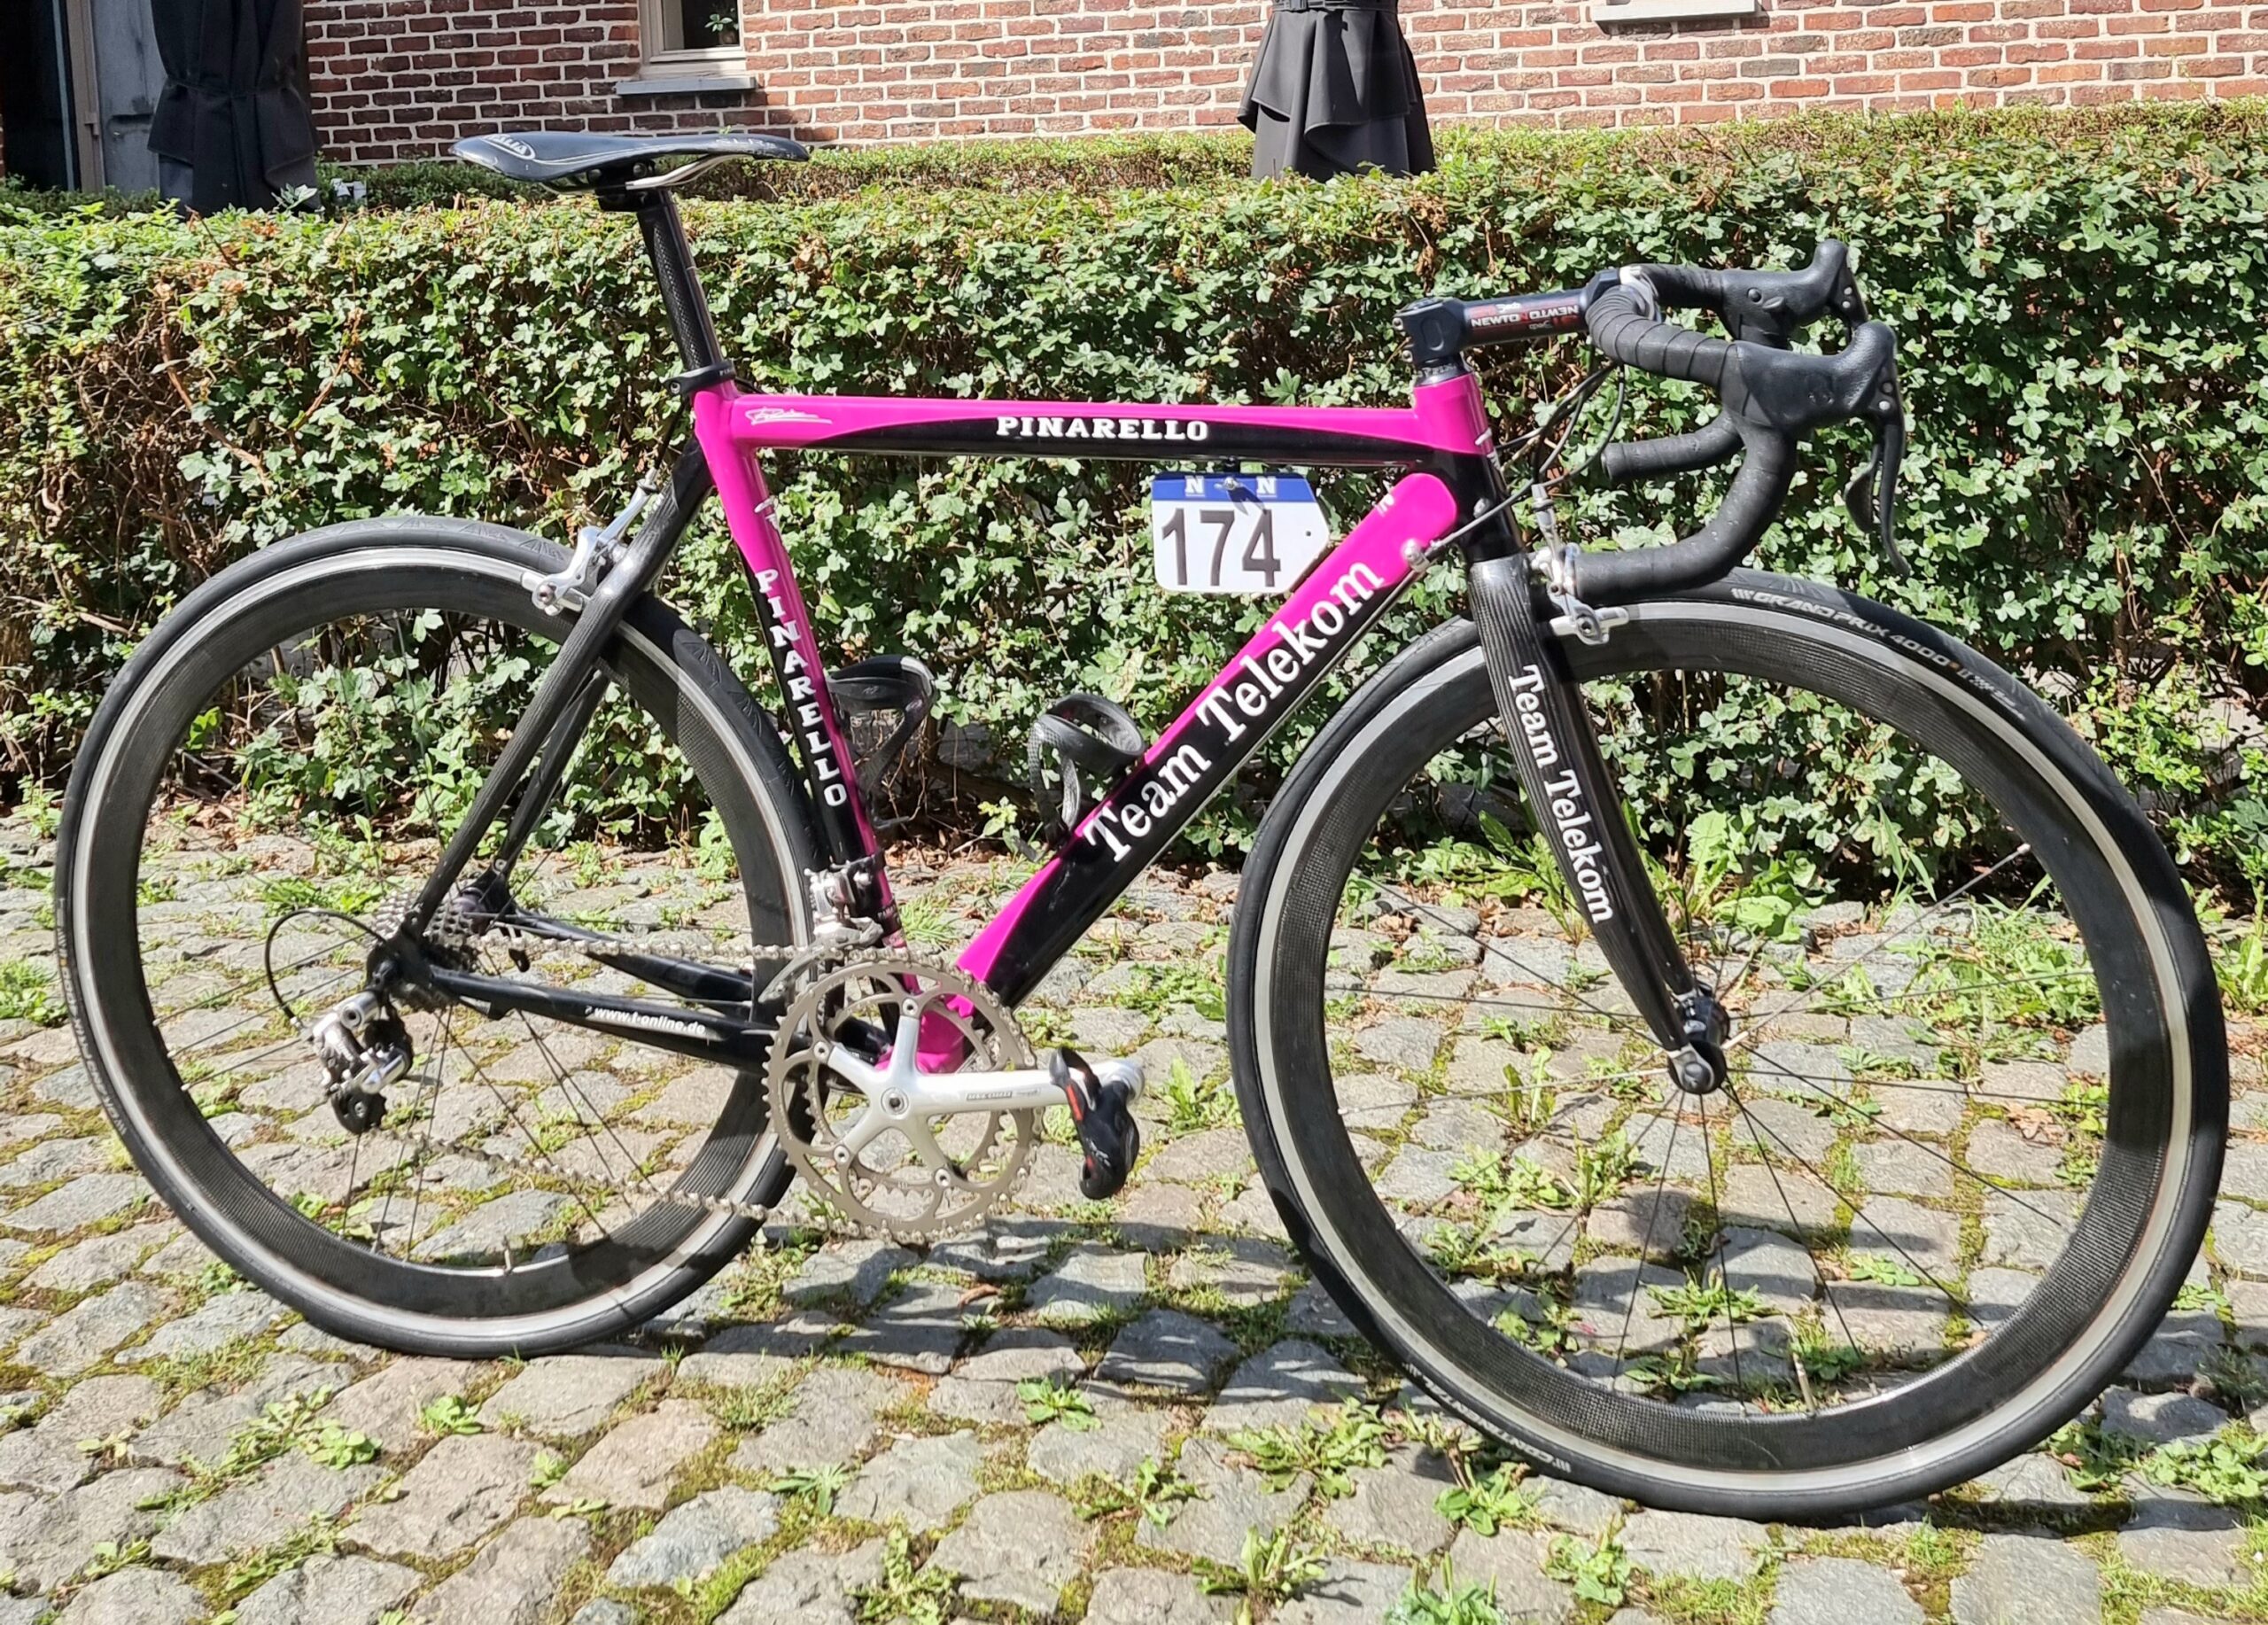 First Look: Pinarello Paris - So Much Italian Style For So Little